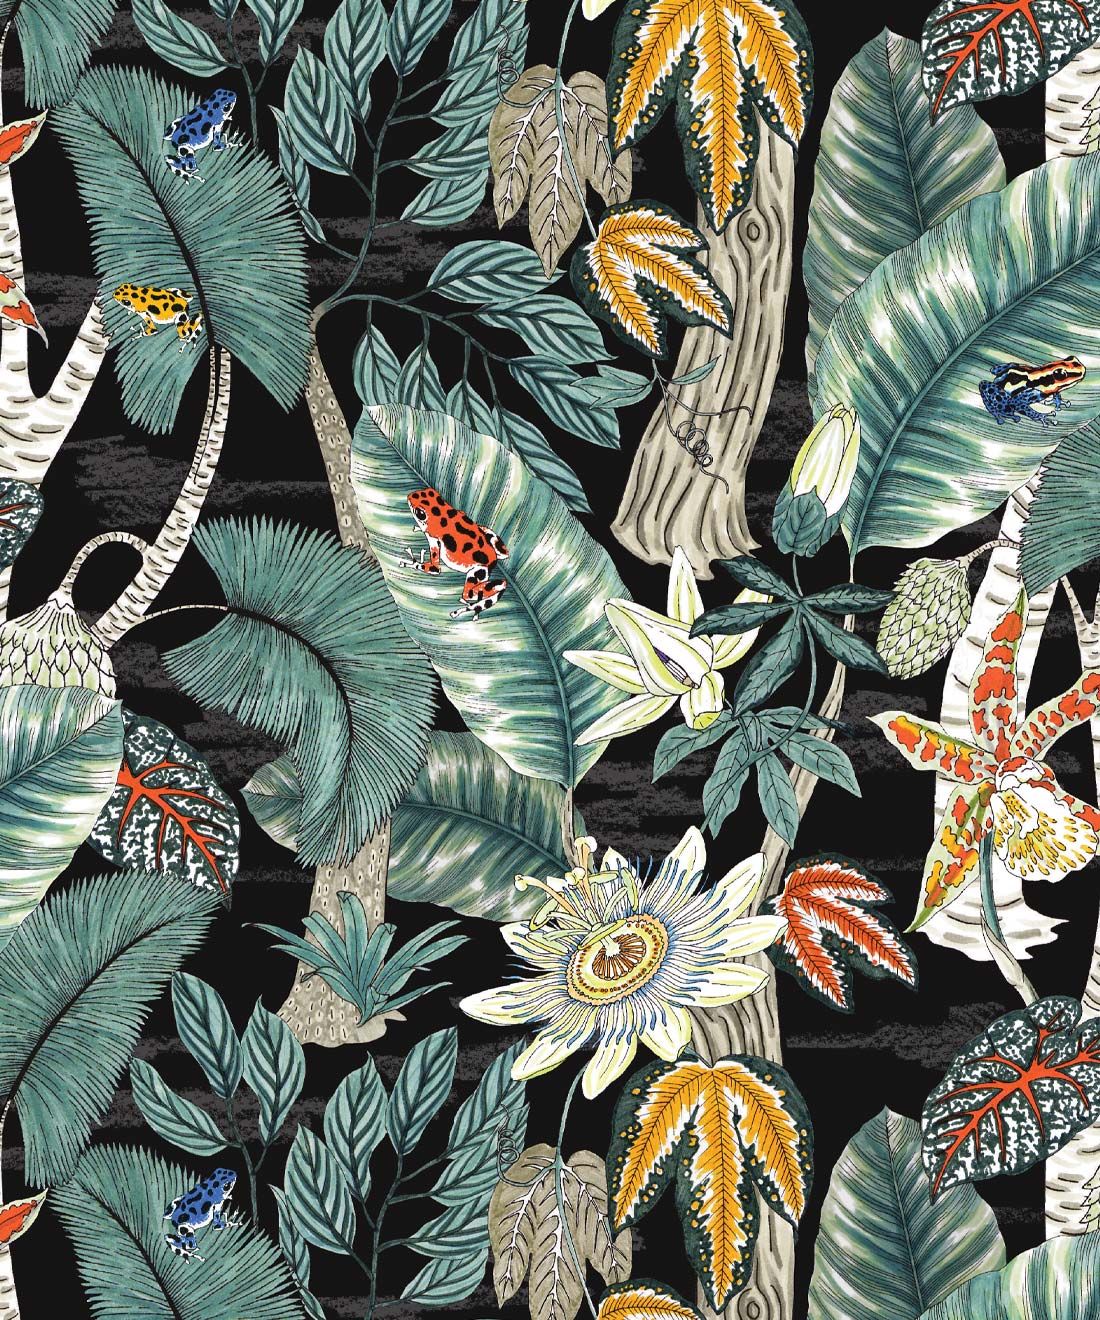 Amazonian Frogs Wallpaper • Tropical Jungle Leaves Wallpaper • Jacqueline Colley • Swatch